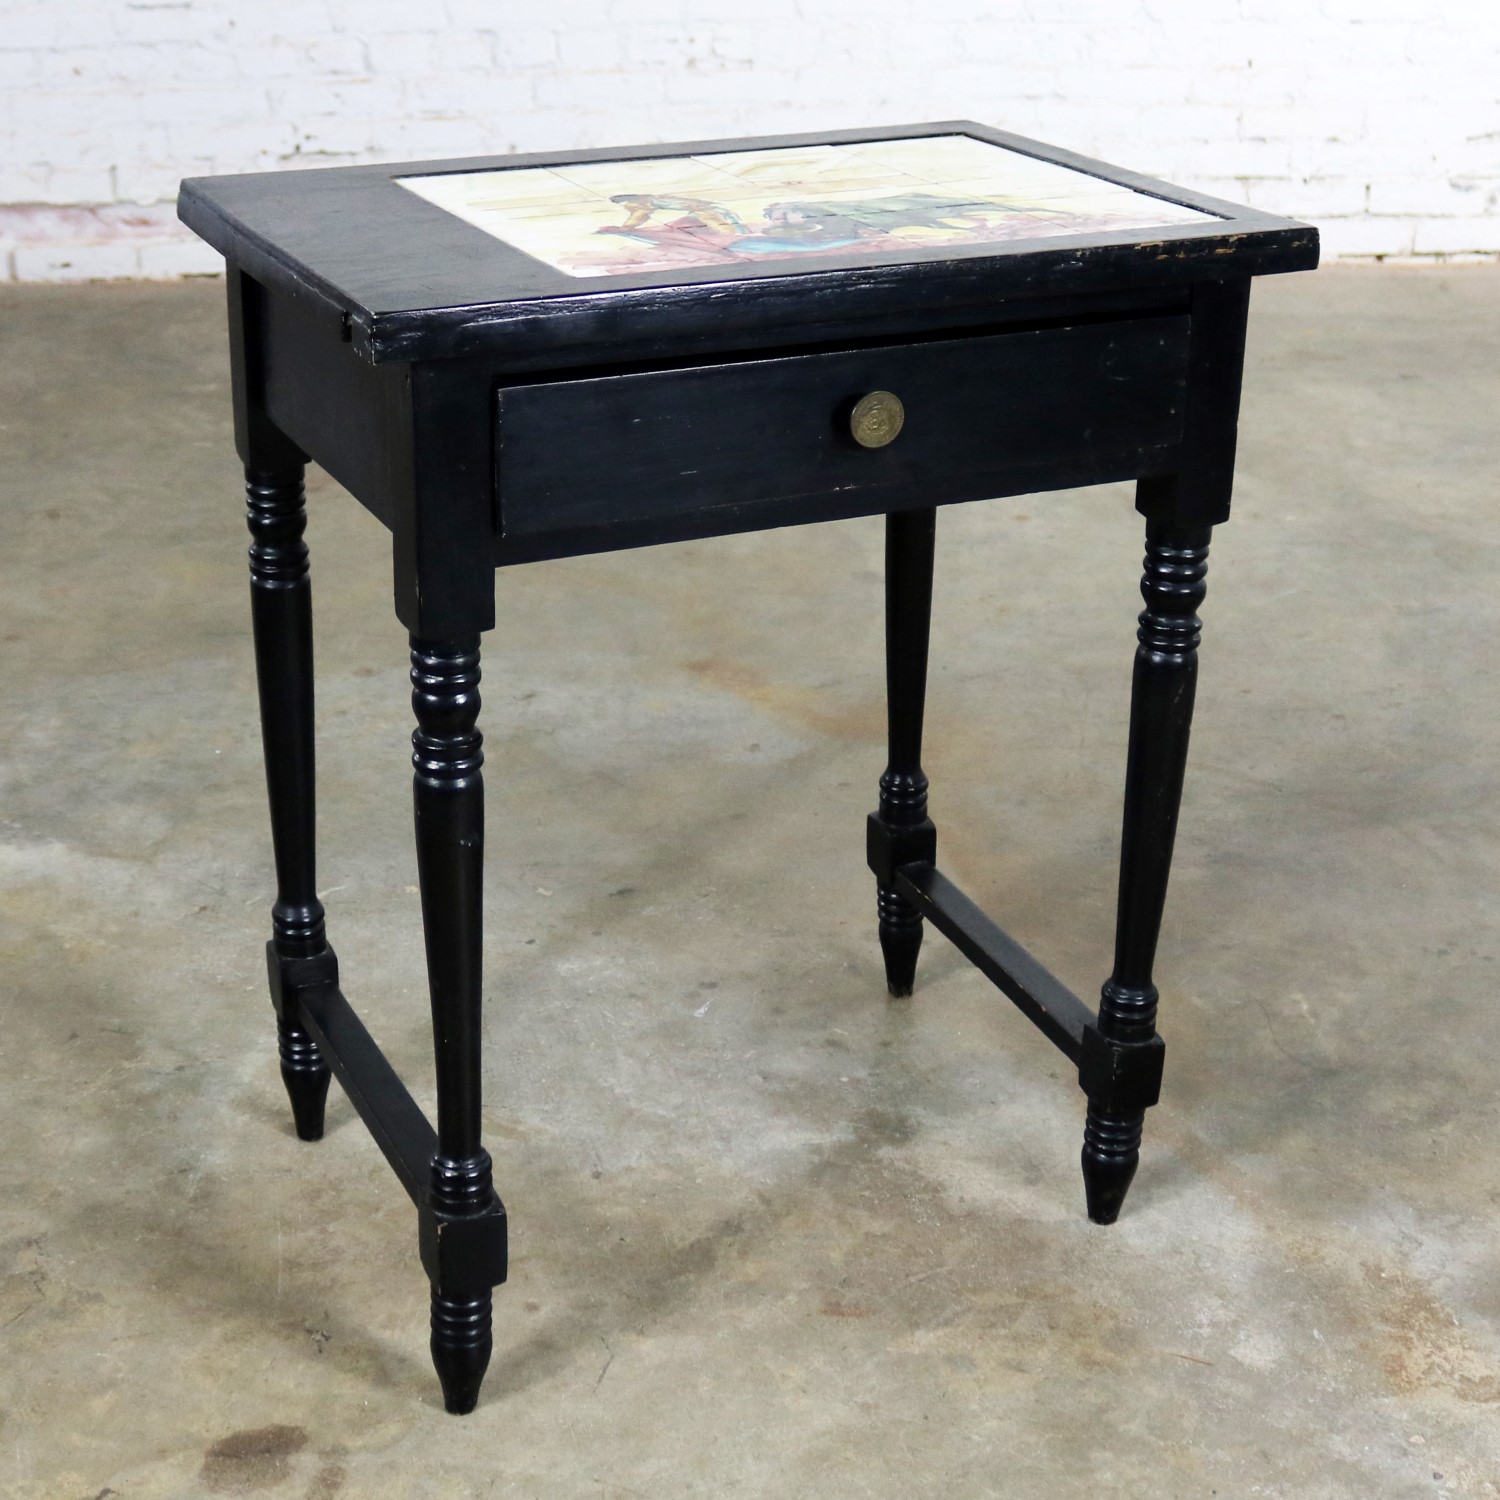 Vintage Black Turned Leg Drawered End Table with Matador and Bull Tile Insert Top